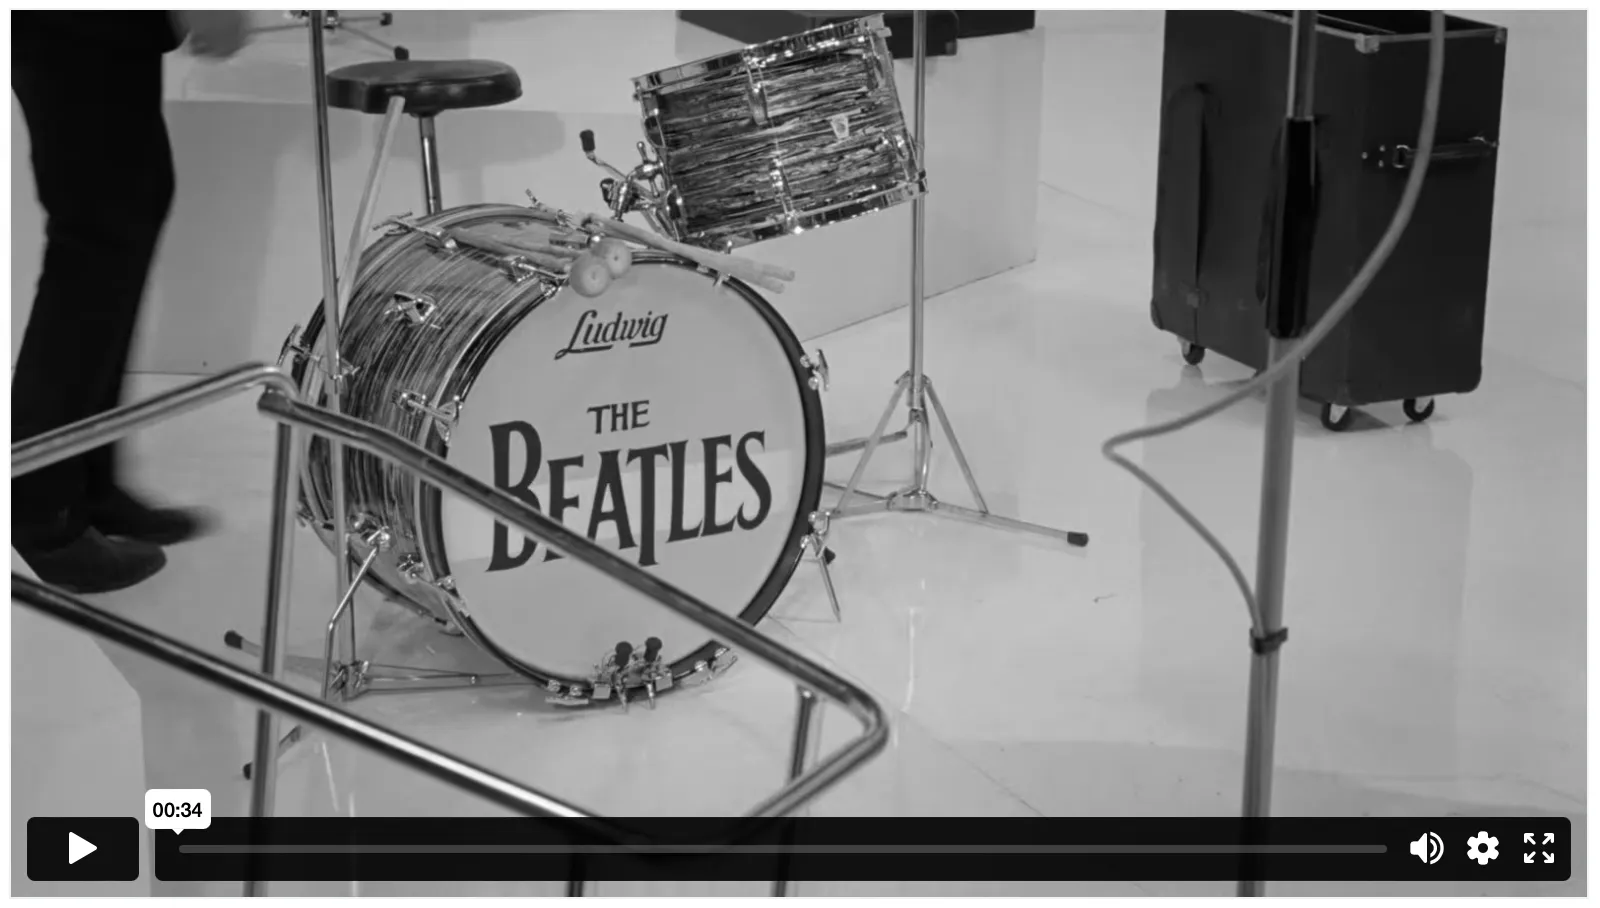 The Beatles - Now And Then - Trailer